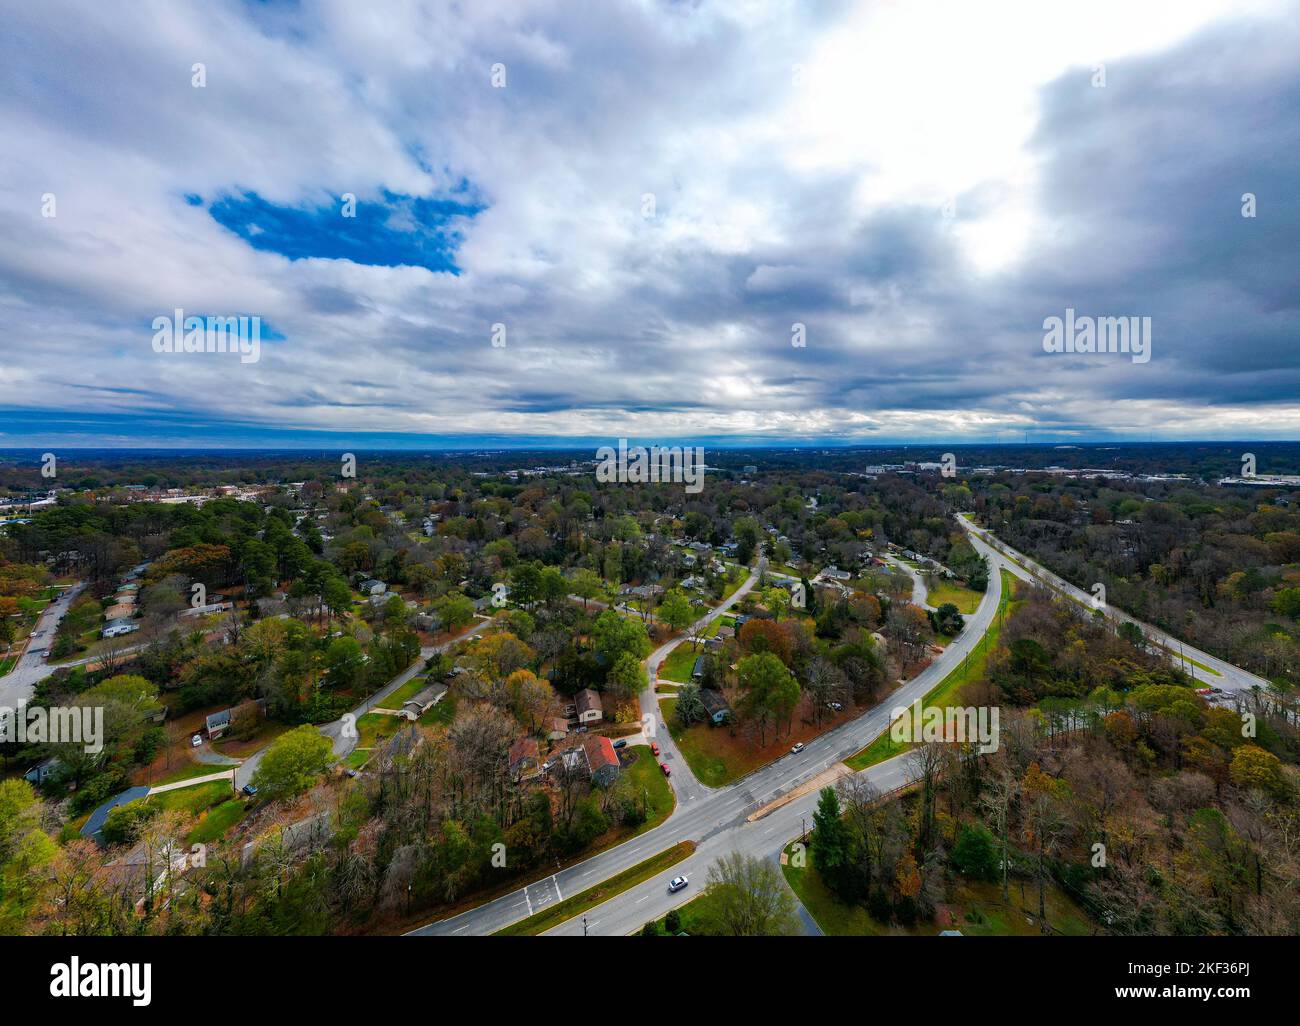 An aerial shot over the Piedmont Triad suburbs of Greensboro city in North Carolina Stock Photo